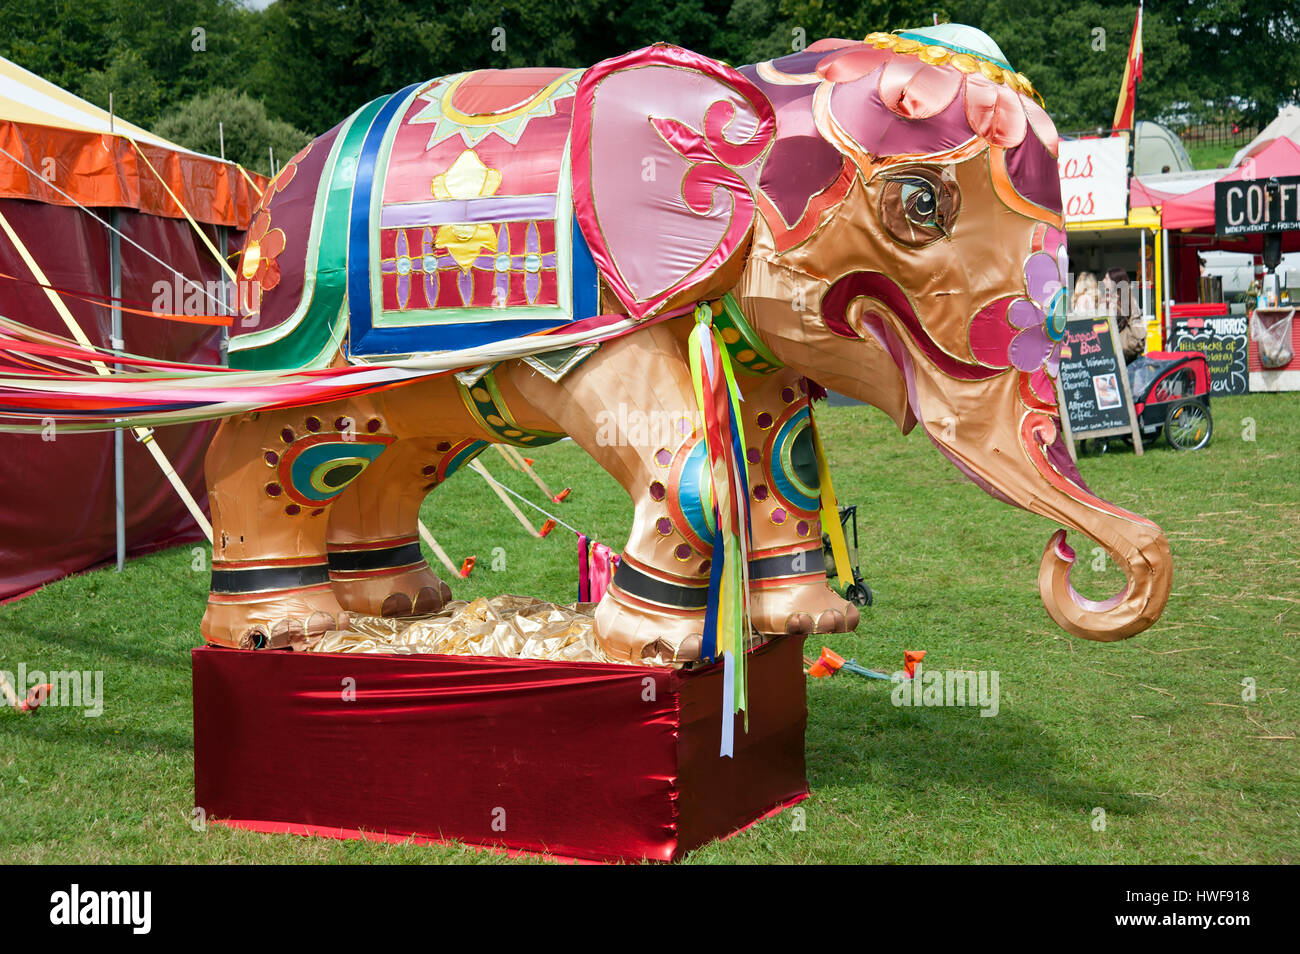 A large colourful silk covered elephant infant of tents and foods stalls at the Port Eliot Festival Cornwall Stock Photo